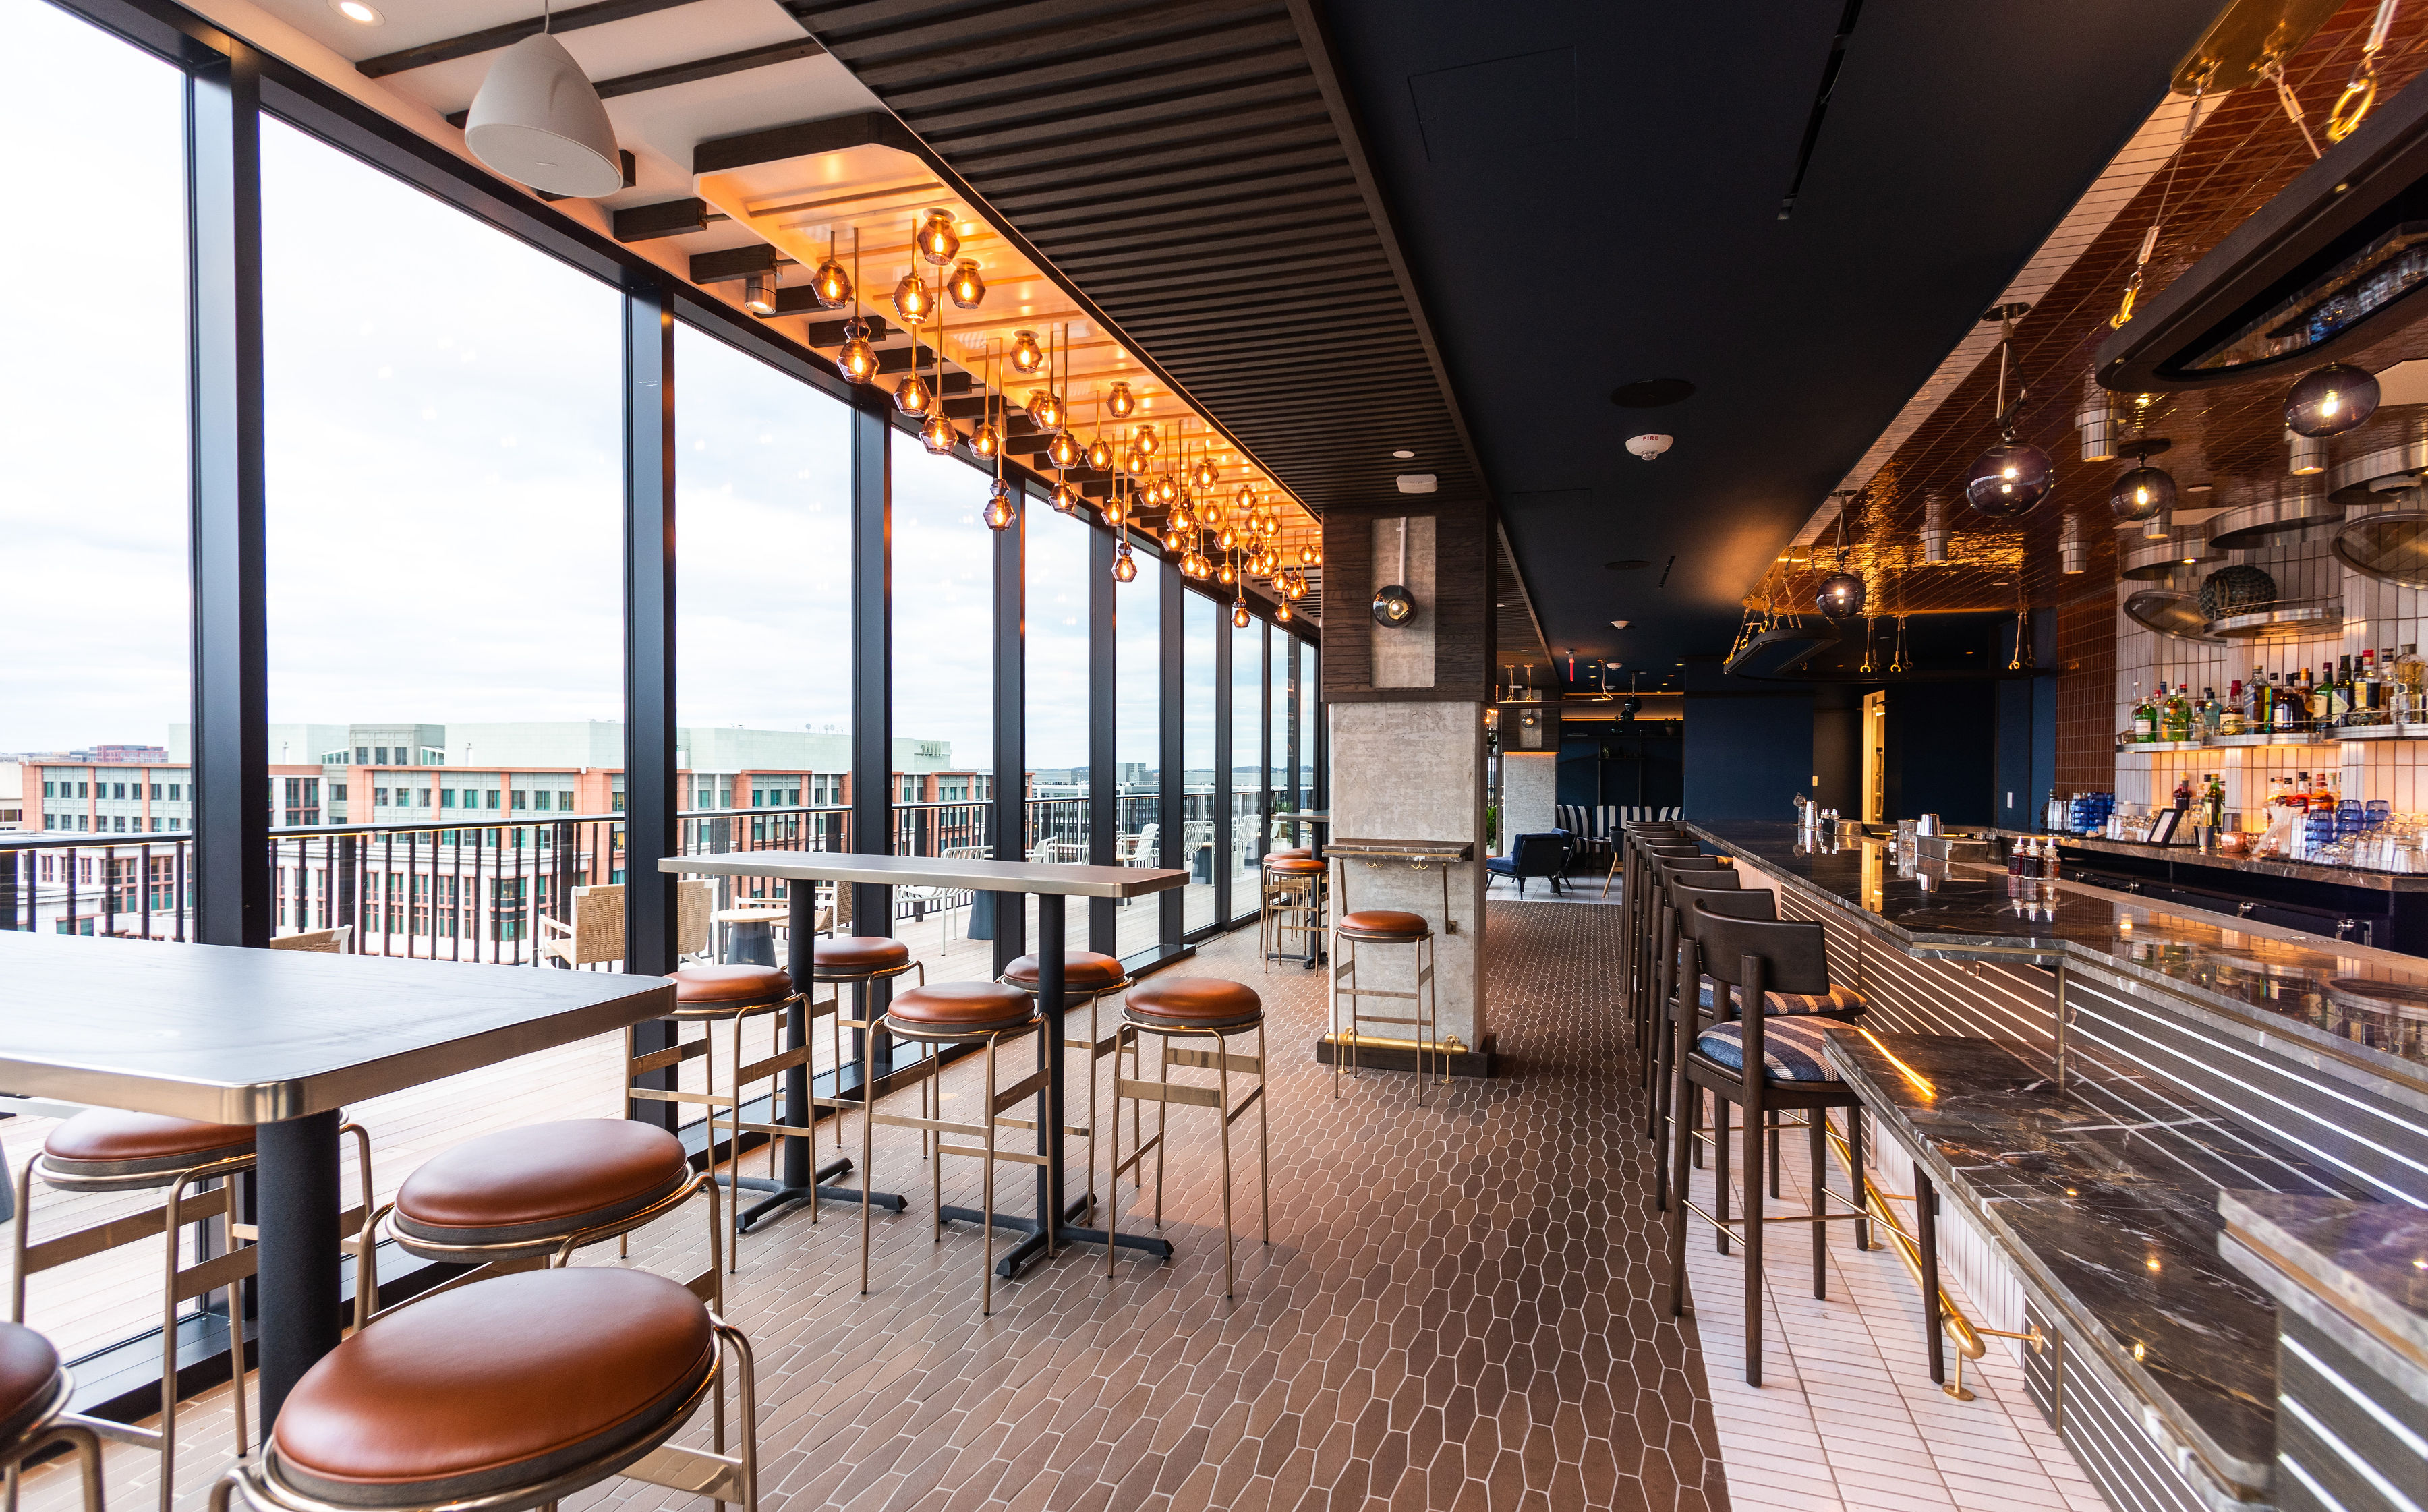 Wall-to-wall windows offer a view from a heated indoor space at the rooftop bar